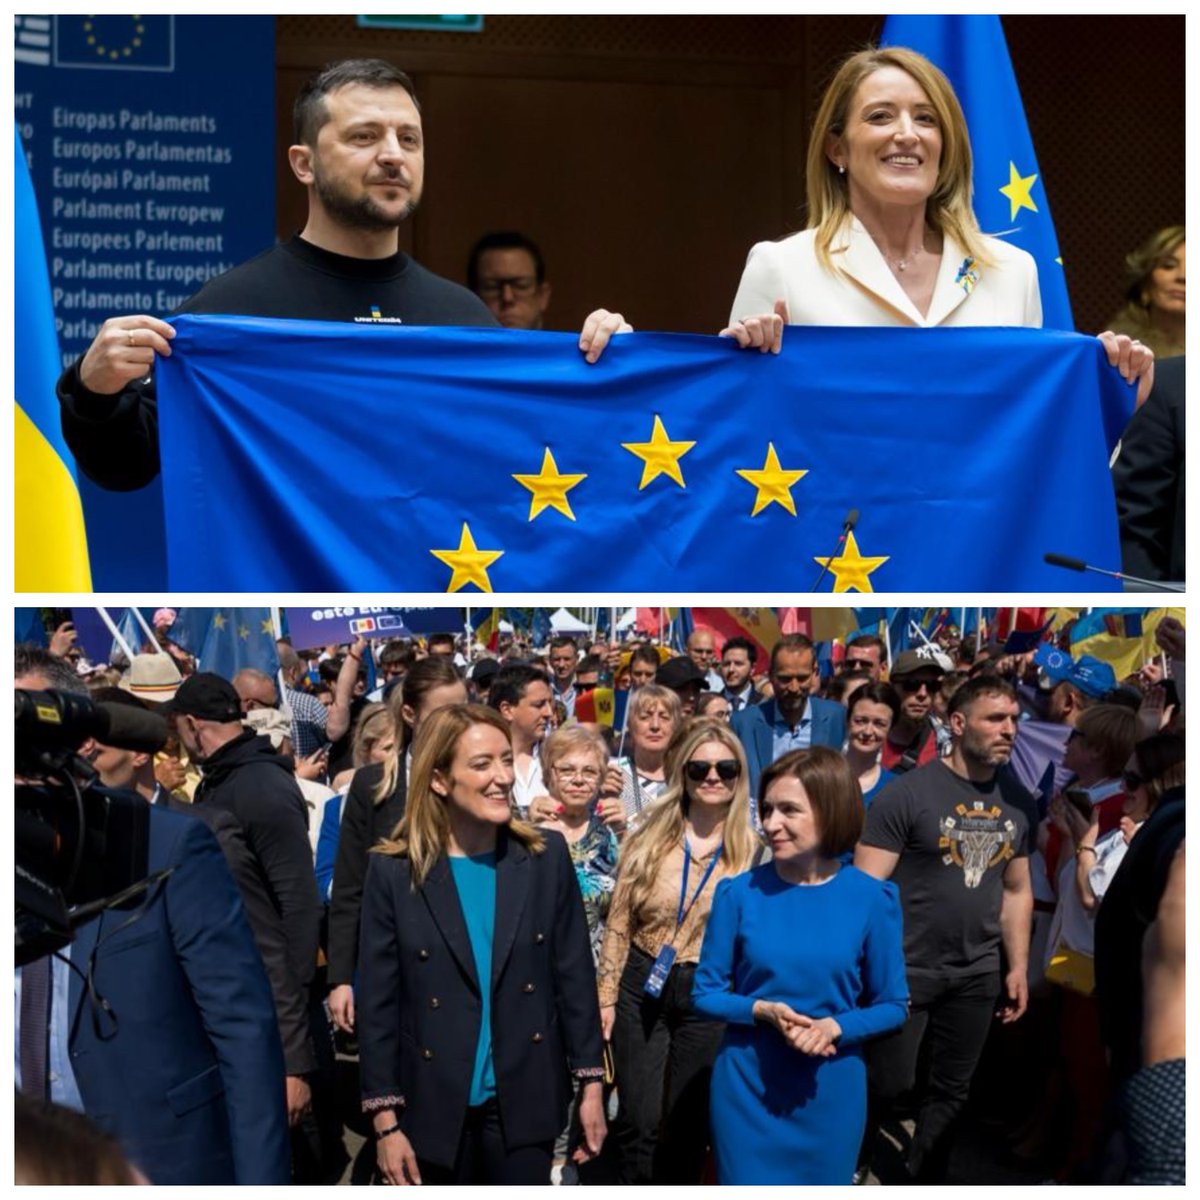 This is a proud moment for Europe. For Ukraine. For Moldova. For everyone fighting for our values. For everyone looking to Europe as a beacon of hope. We kept our promises. We made history. Now we will write the future together. @ZelenskyyUa @sandumaiamd